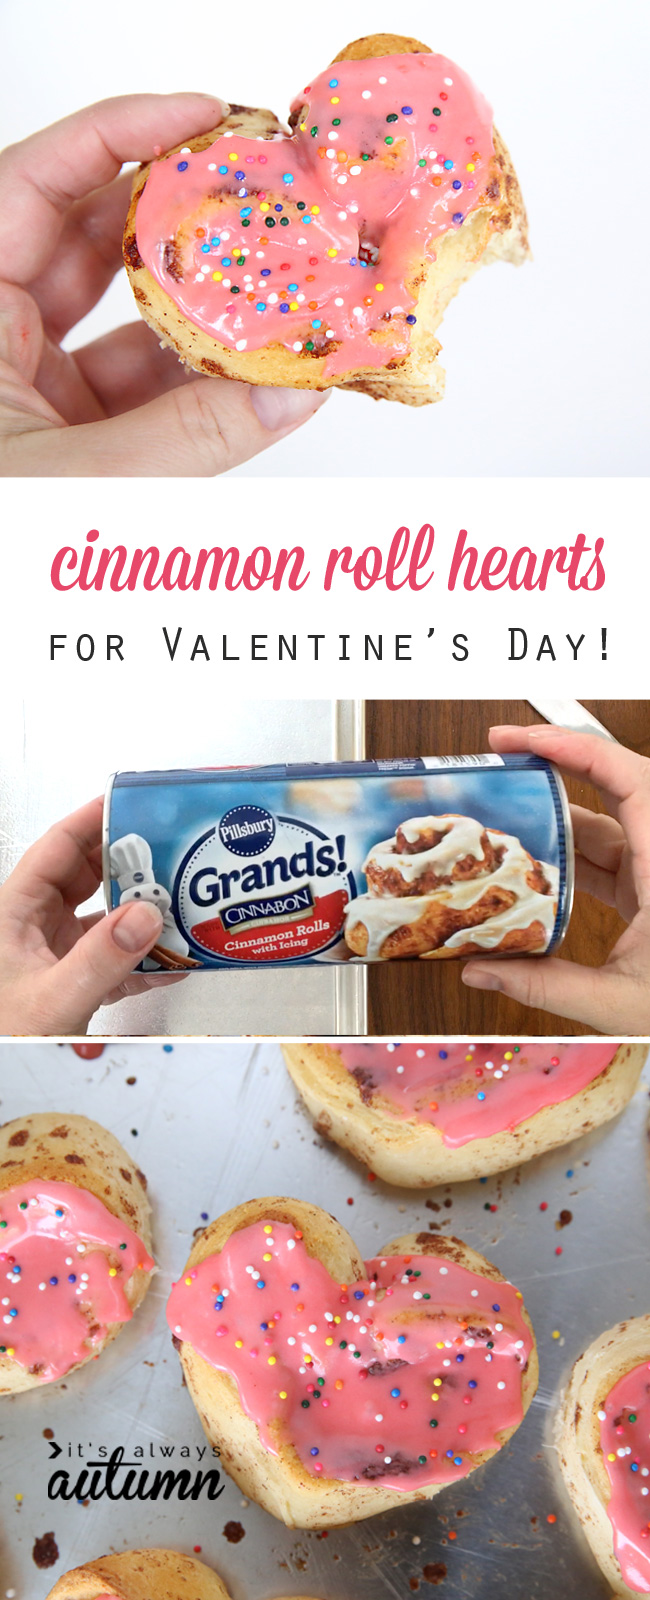 Cinnamon rolls in the shape of a heart with pink frosting and sprinkles; roll of Grands! cinnamon rolls